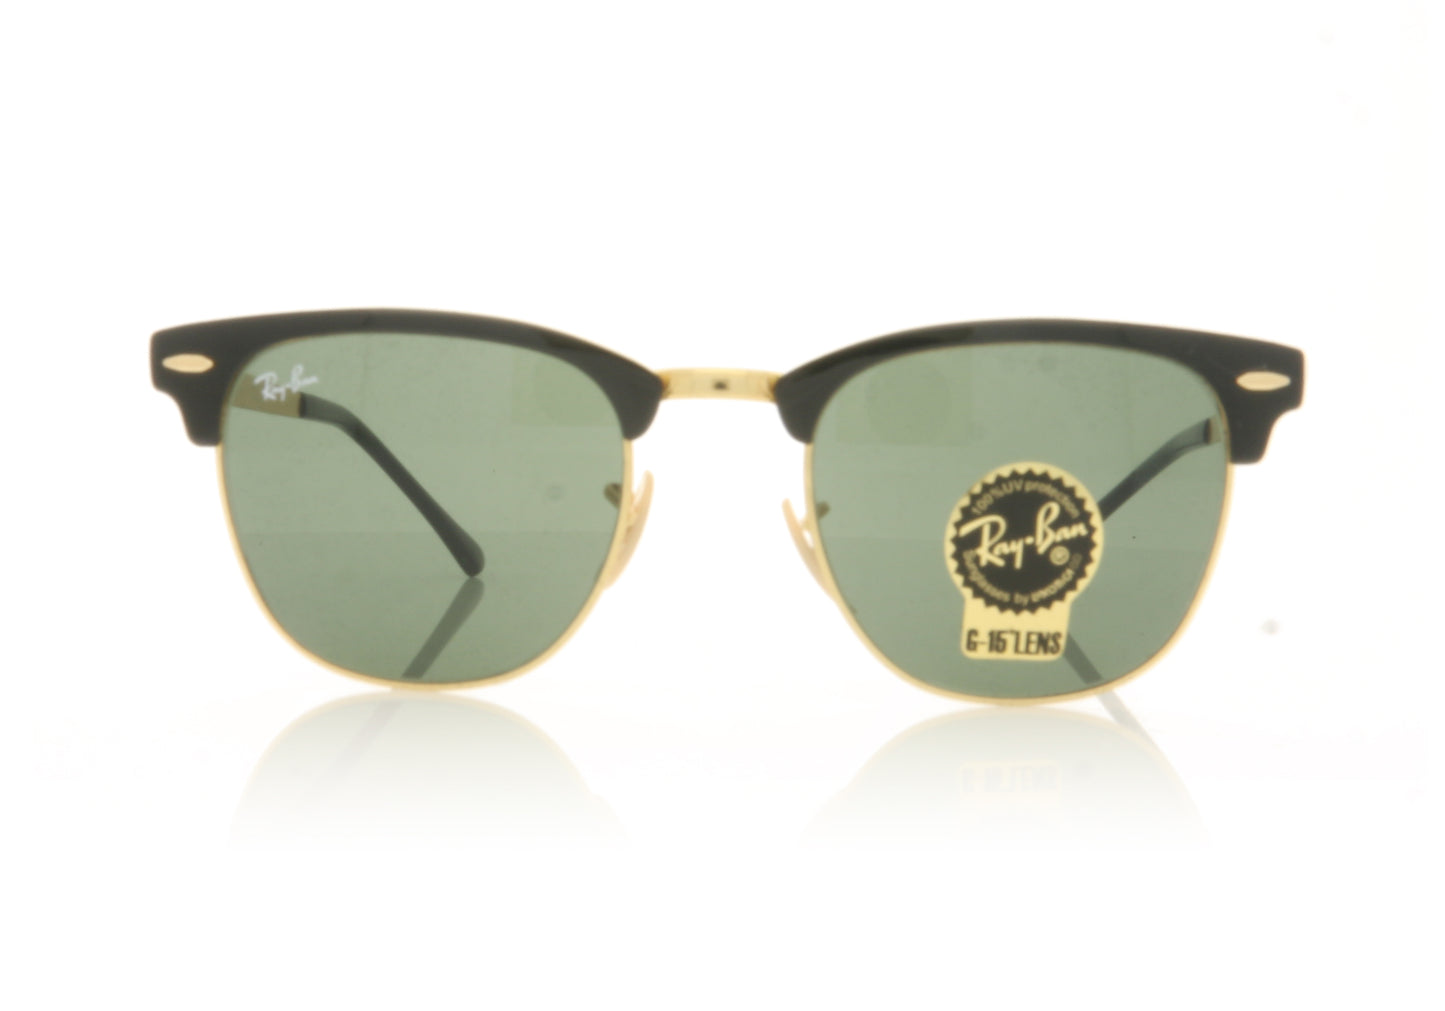 Ray-Ban Clubmaster Metal 187 Gold Top On Black Sunglasses - Front